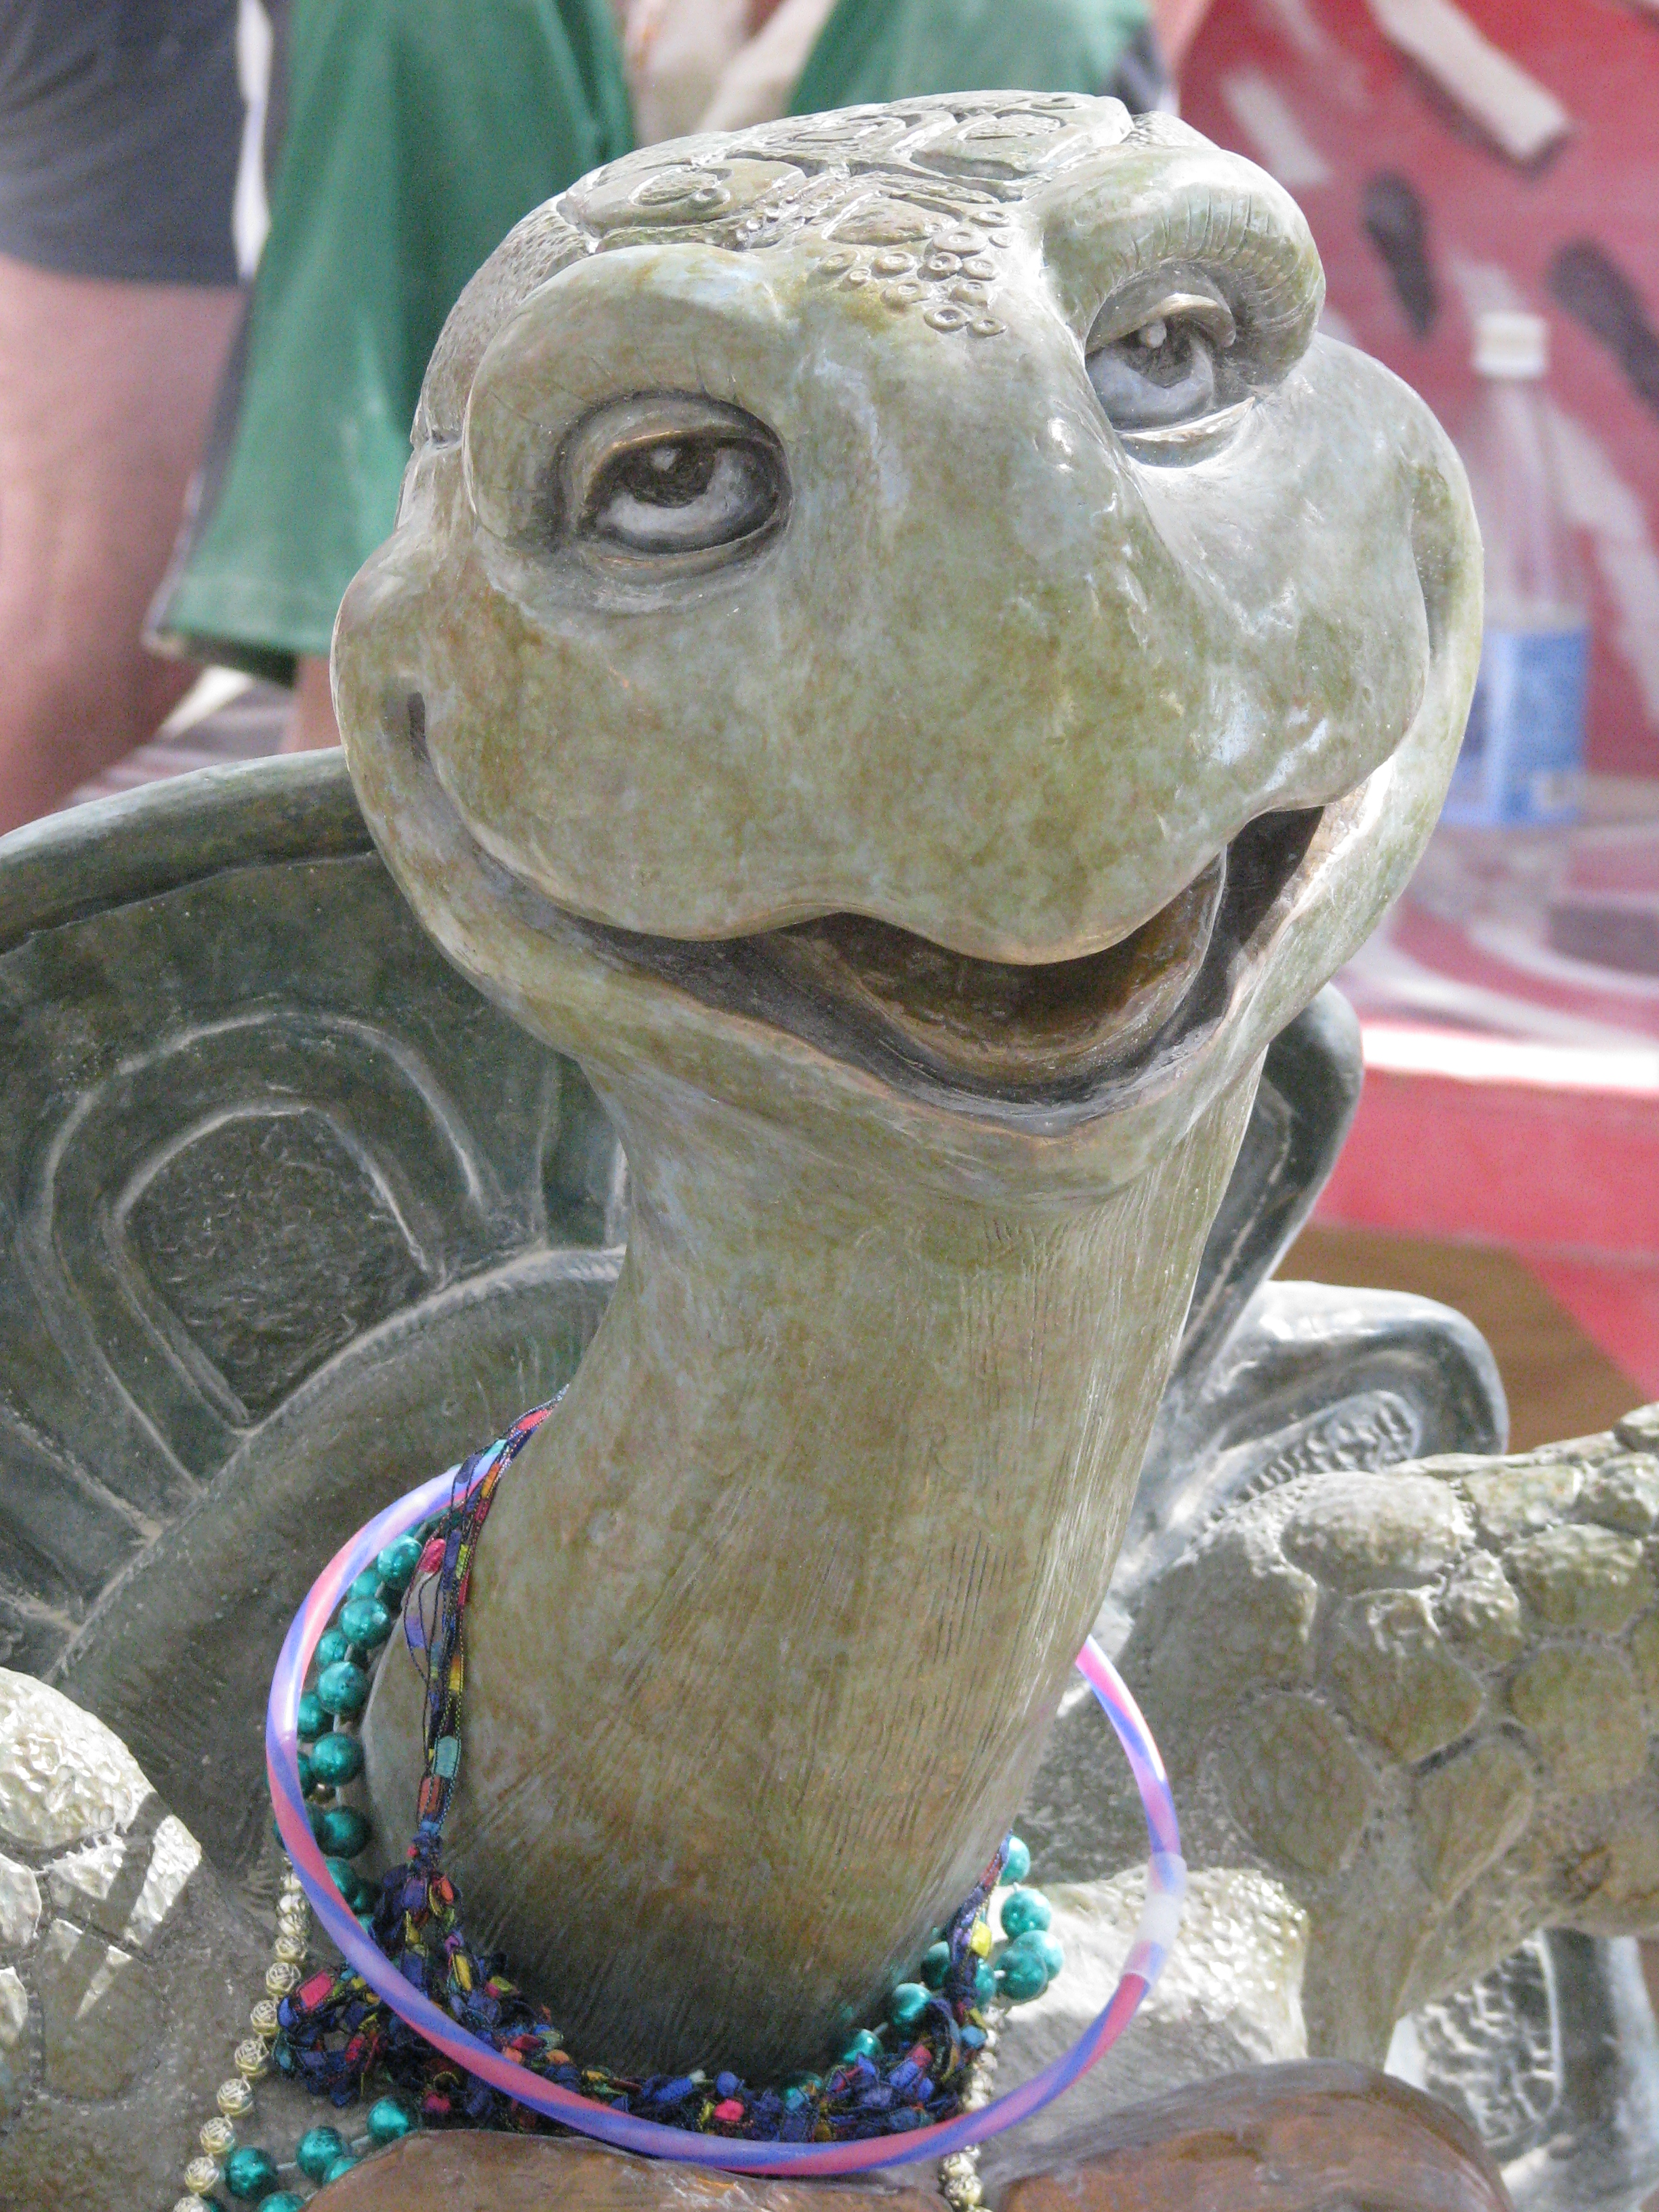 On a less monumental scale, the Center Camp Cafe at Burning Man is filled with art, such as this turtle.